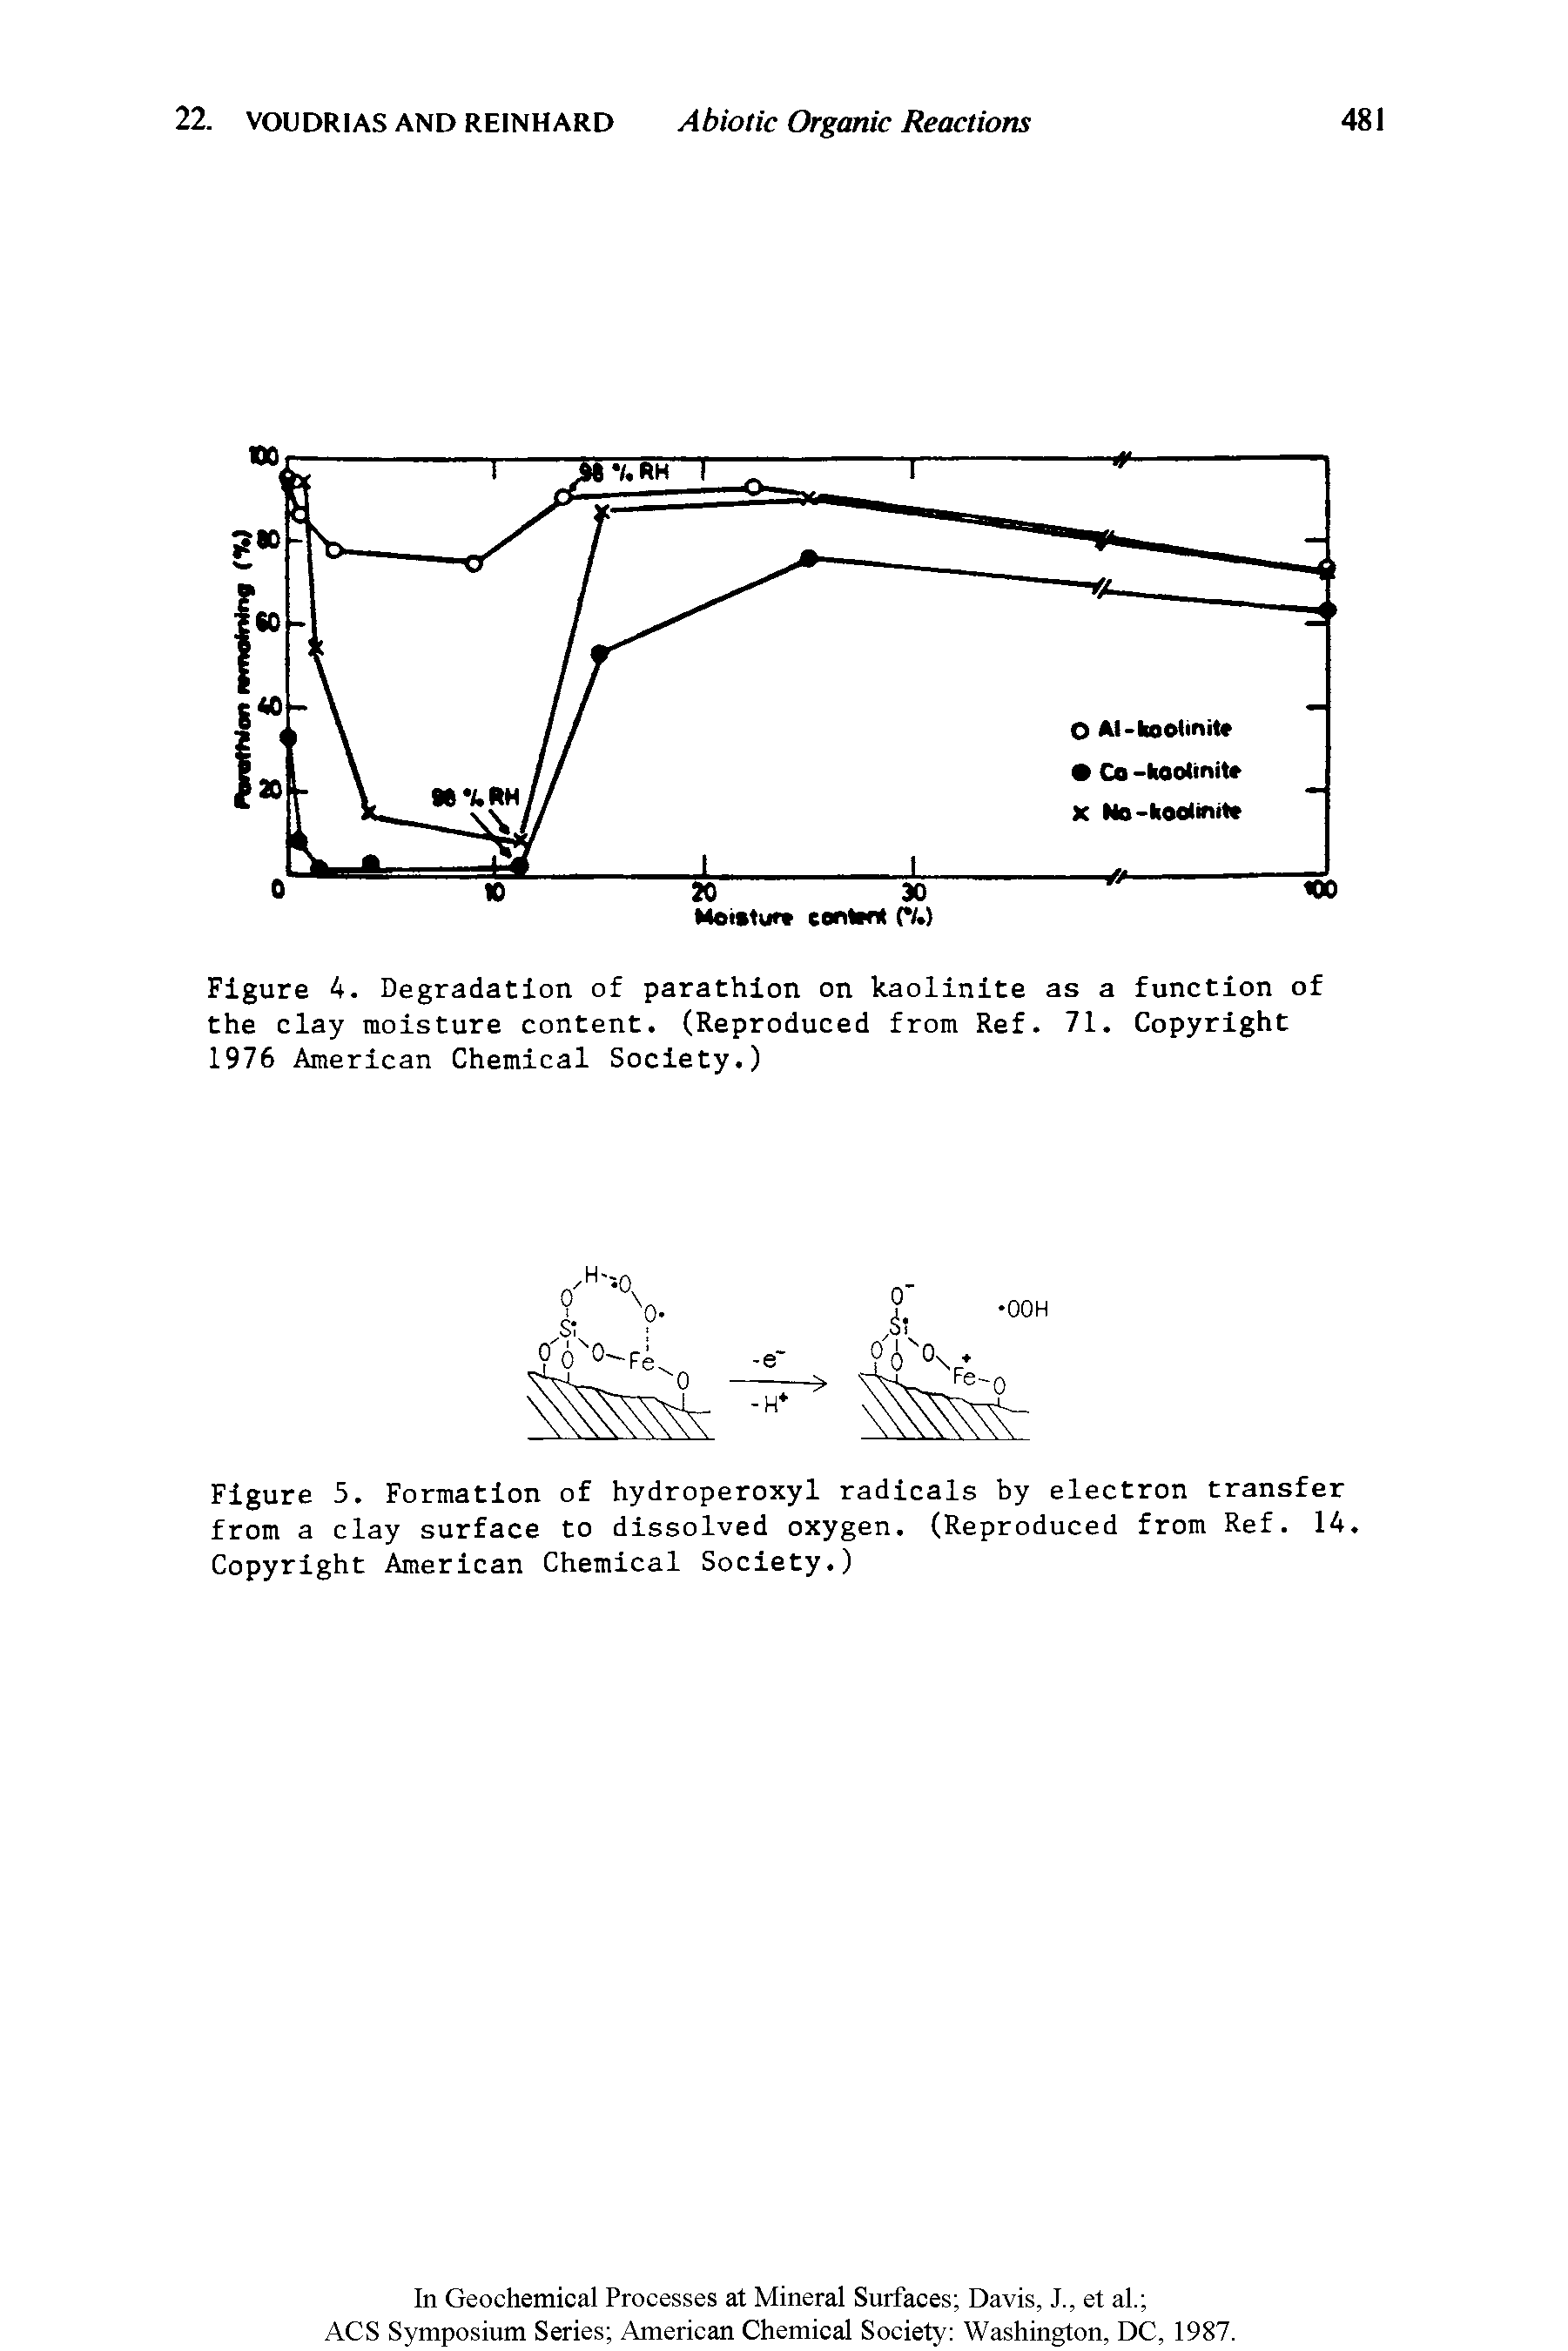 Figure 4. Degradation of parathion on kaolinite as a function of the clay moisture content. (Reproduced from Ref. 71. Copyright 1976 American Chemical Society.)...